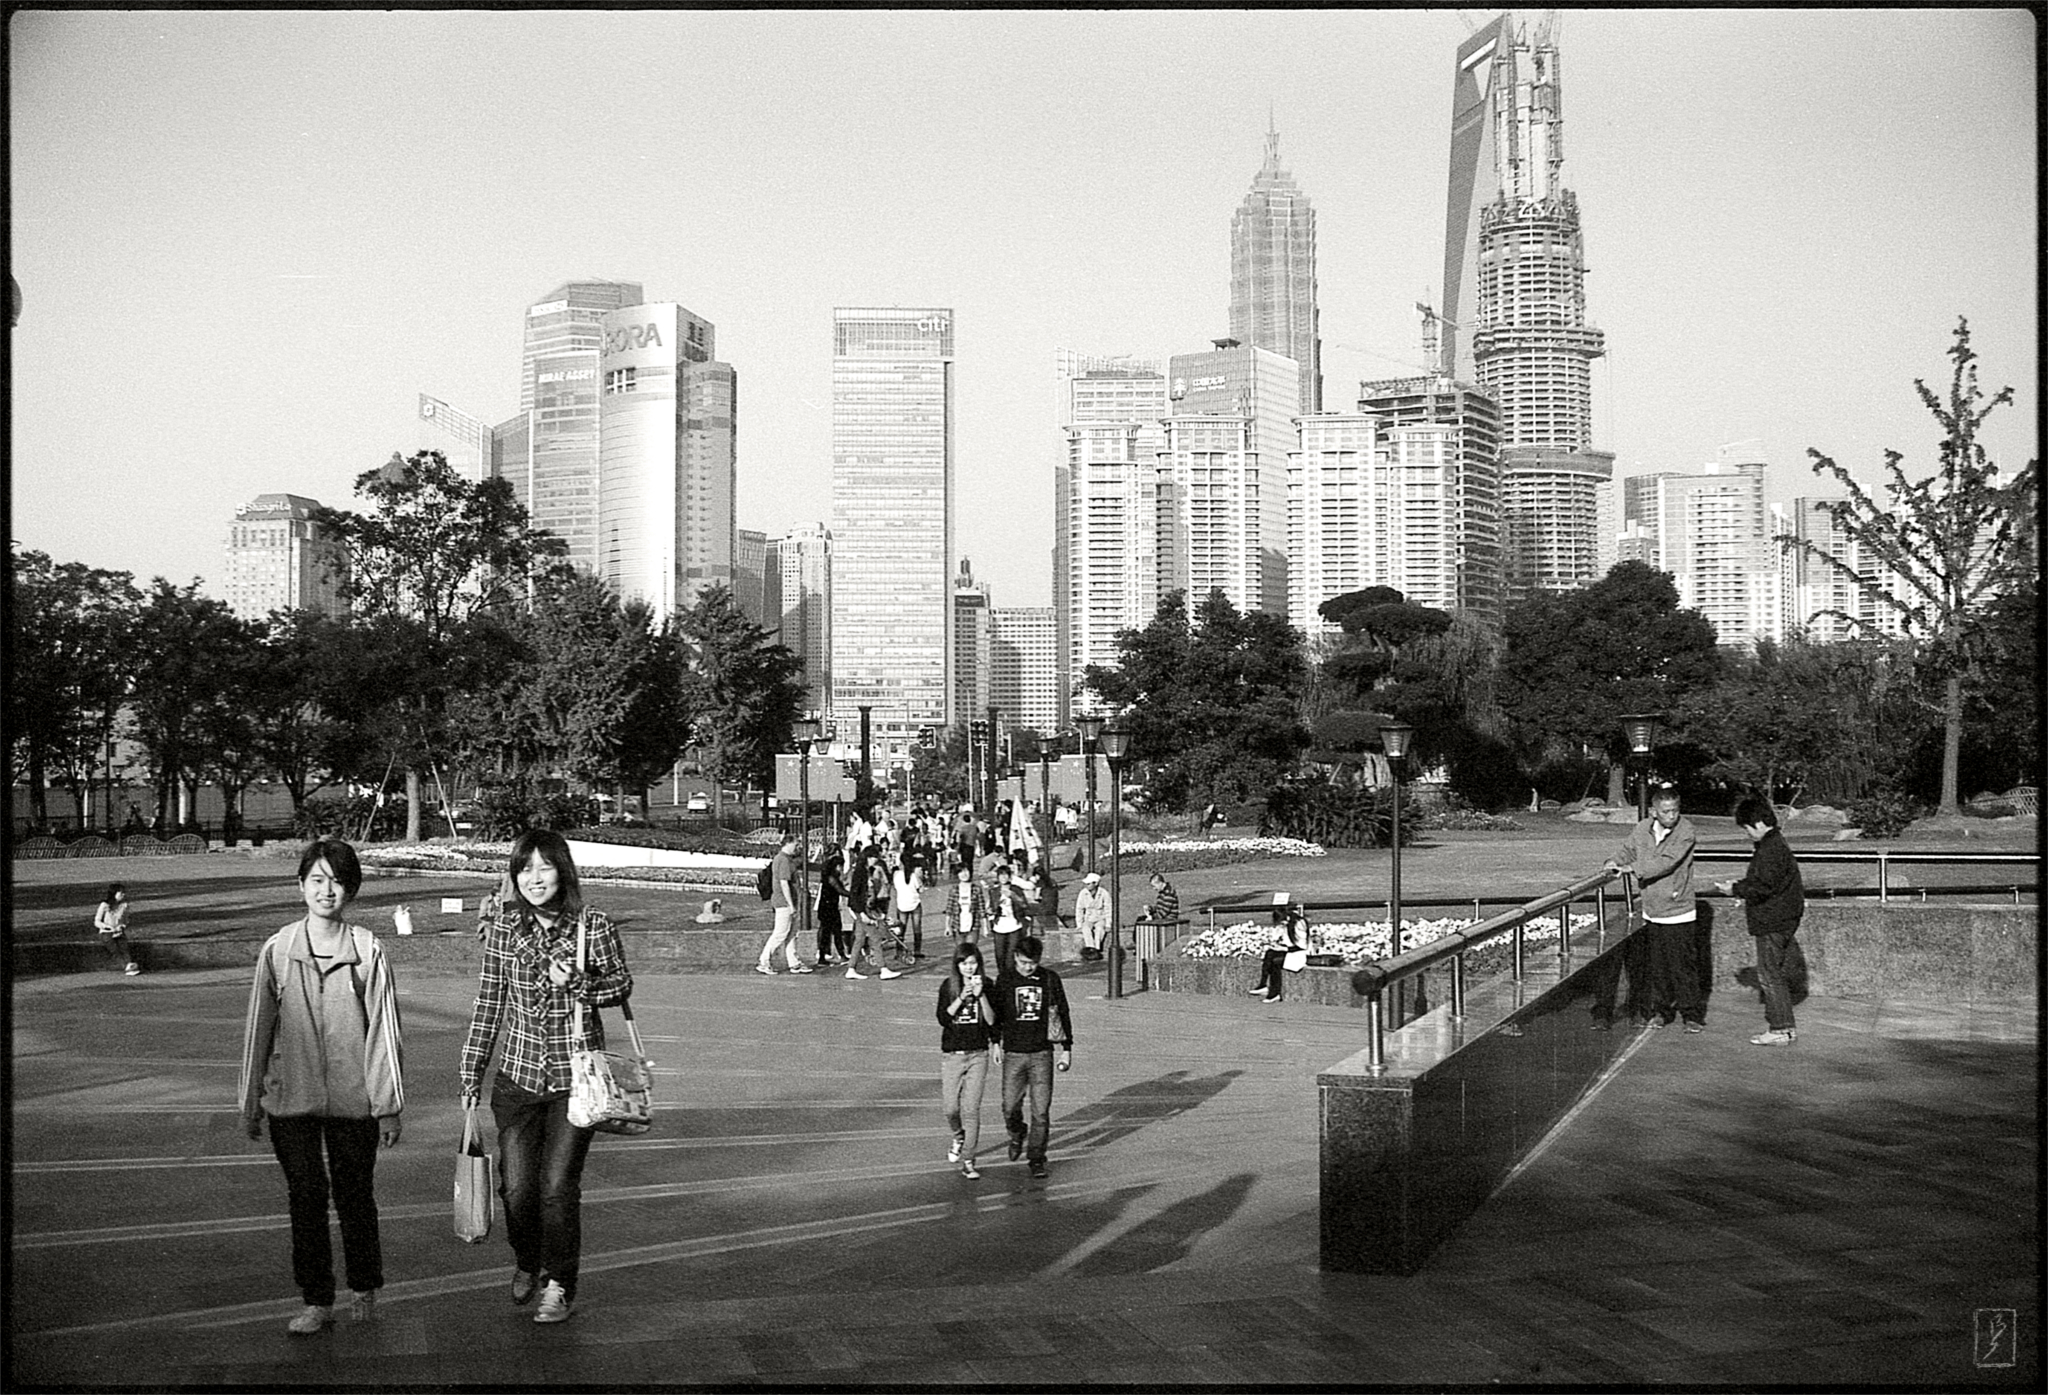 Gucheng park borrows the skyline of Pudong as scenery, but it's not possible to walk there from the park. The wide Huangpu river is between the two.